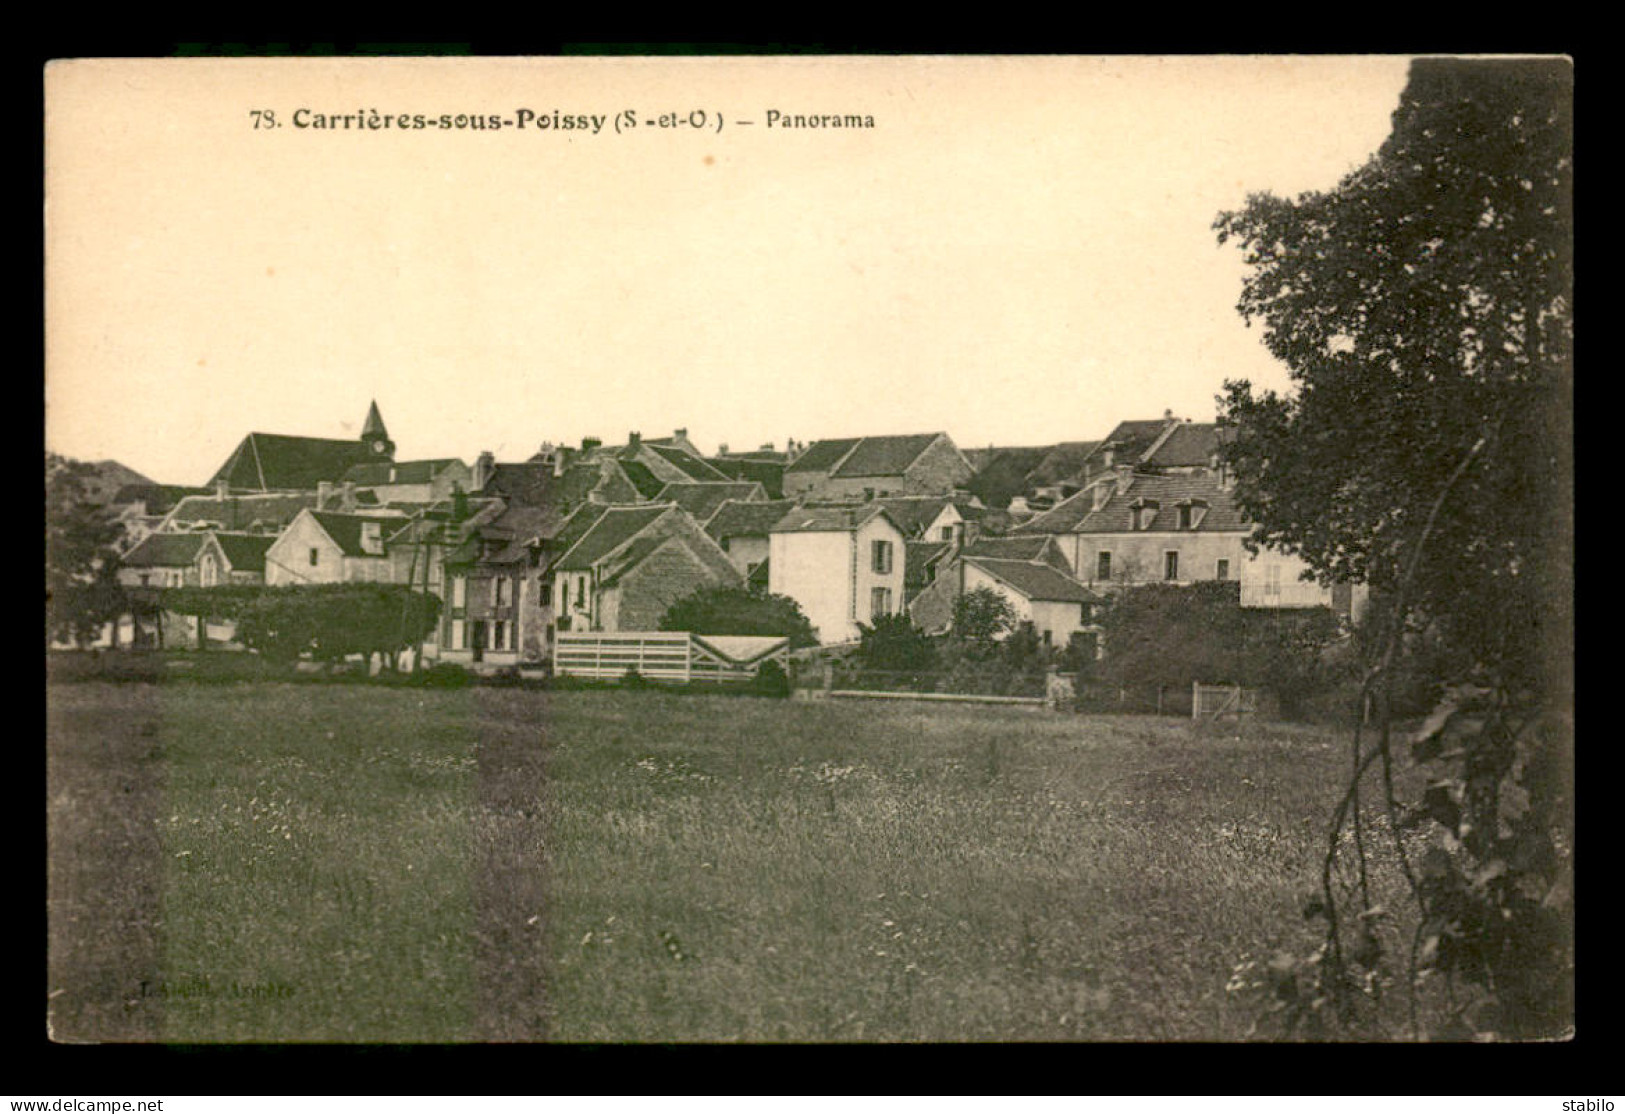 78 - CARRIERES-SOUS-POISSY - PANORAMA - Carrieres Sous Poissy